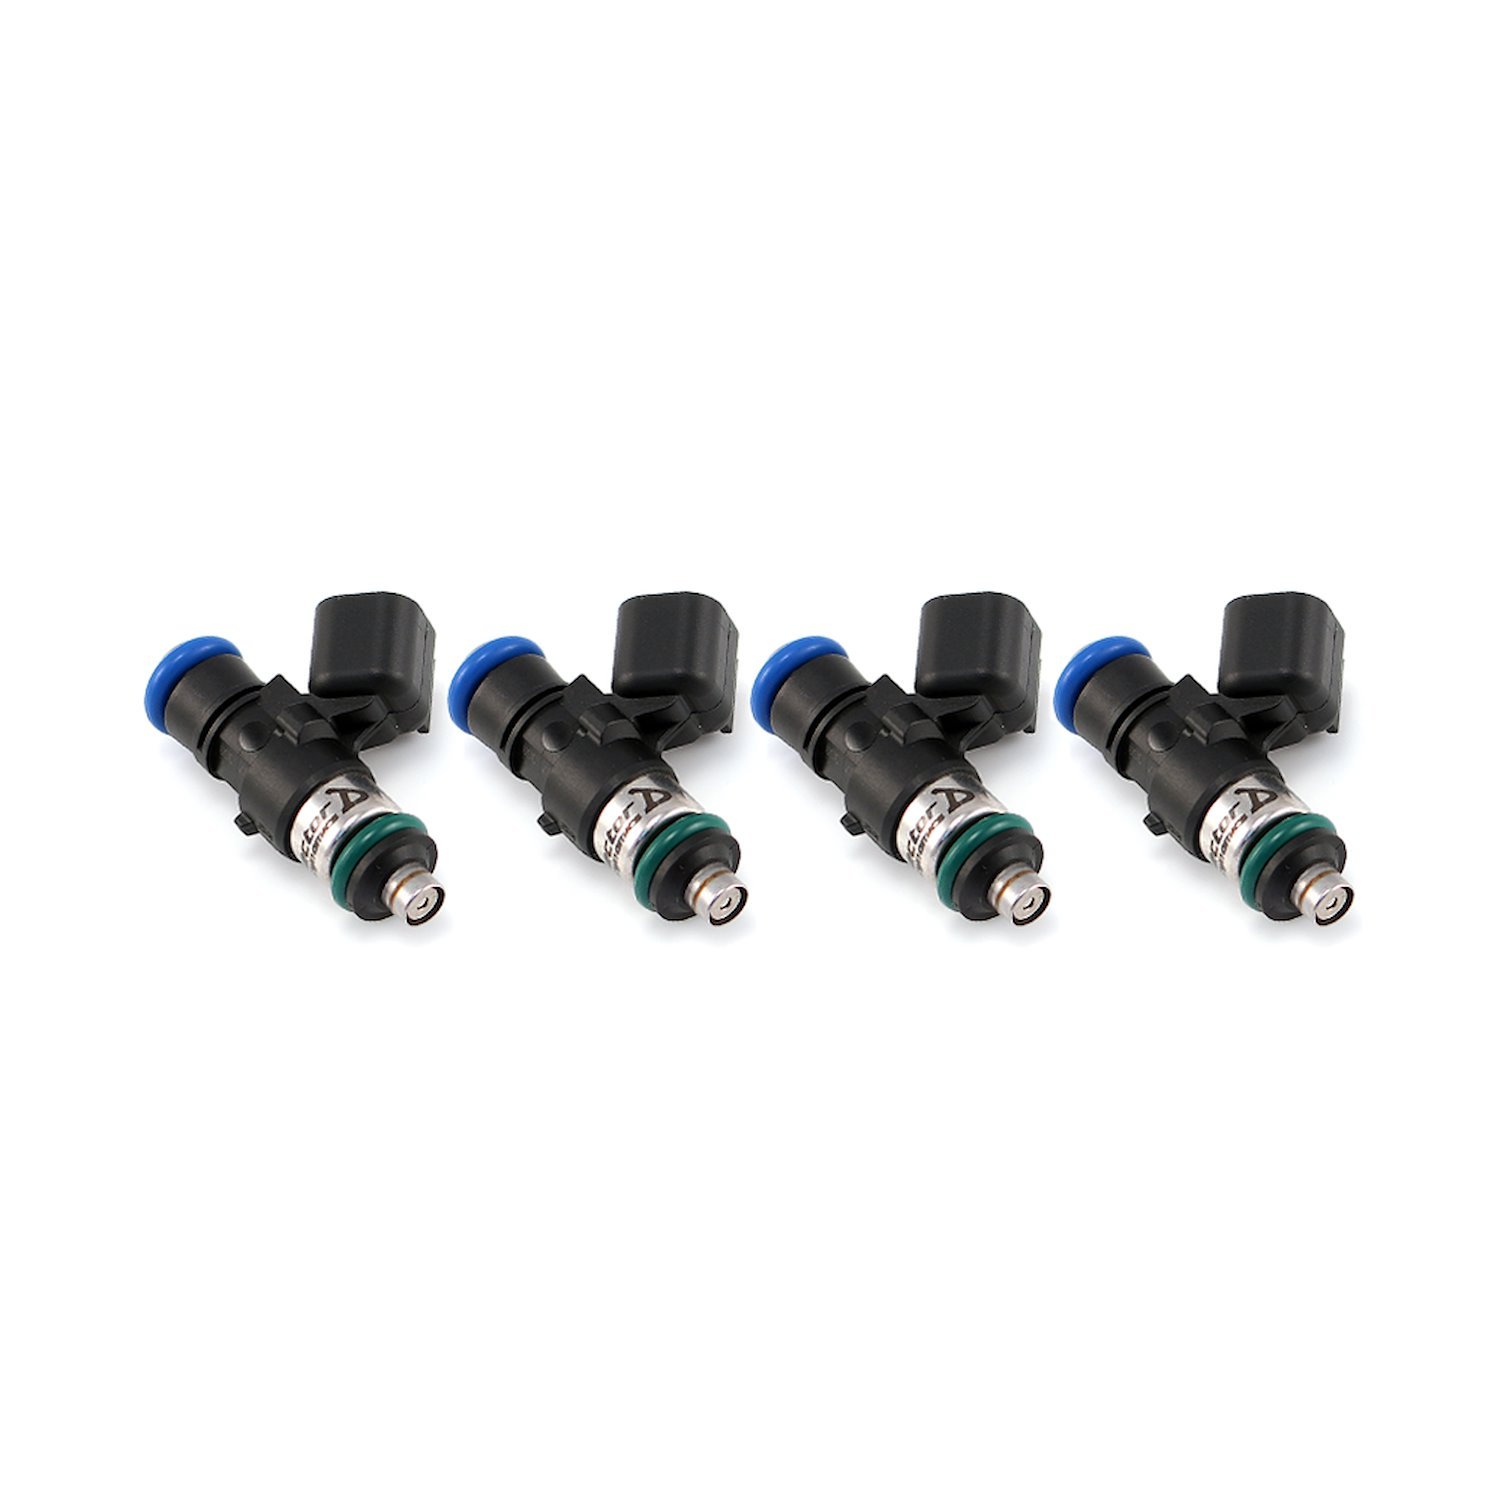 1700.34.14.14.4 1700cc Fuel Fuel Injector, w/Electrical Connector, 34 mm Length w/o Adapter, 14 mm O-Ring